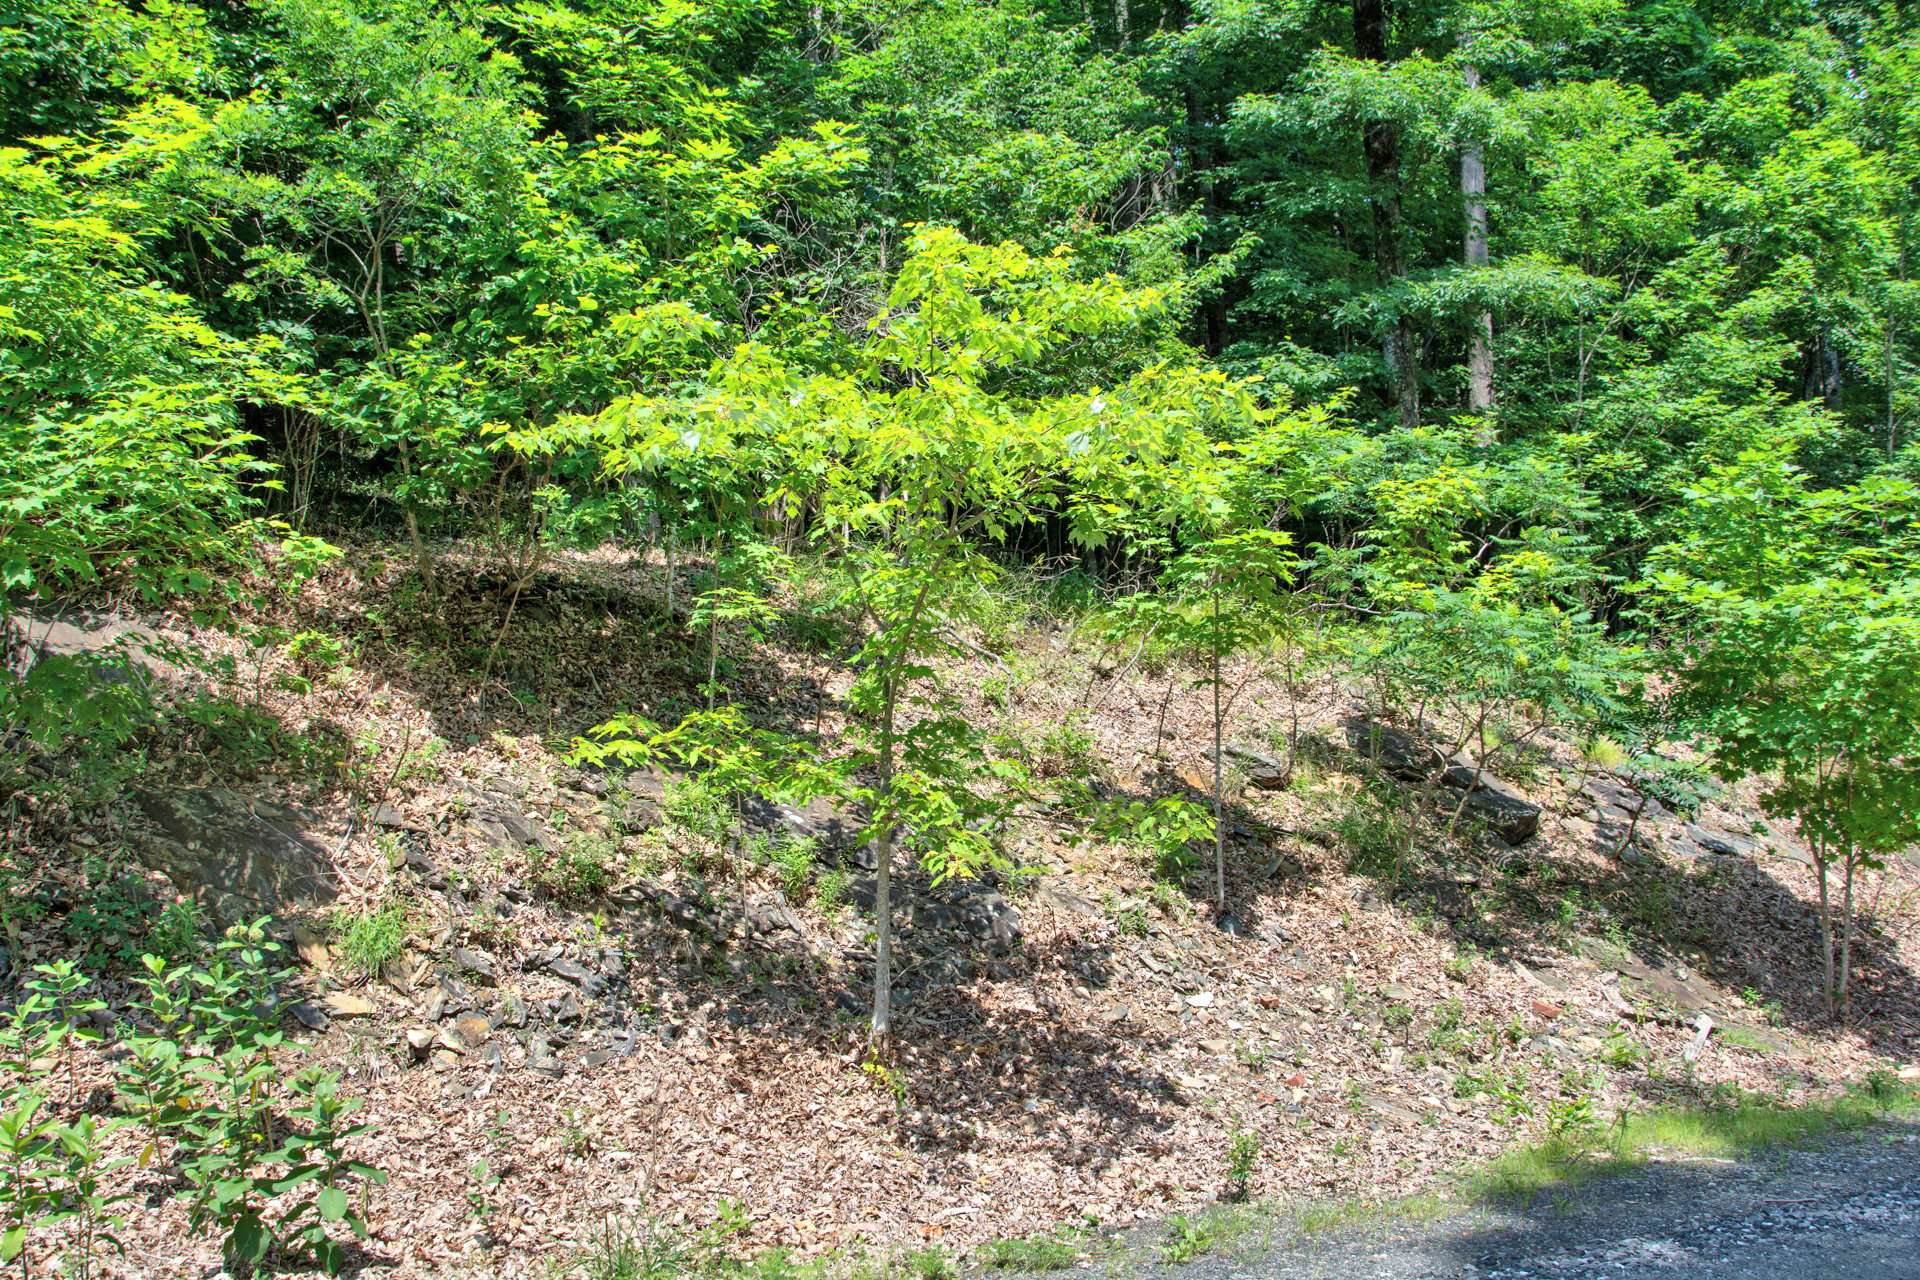 Lot 35 is a 1.08 acre Stonebridge home site with shared well rights offered at $45,000.